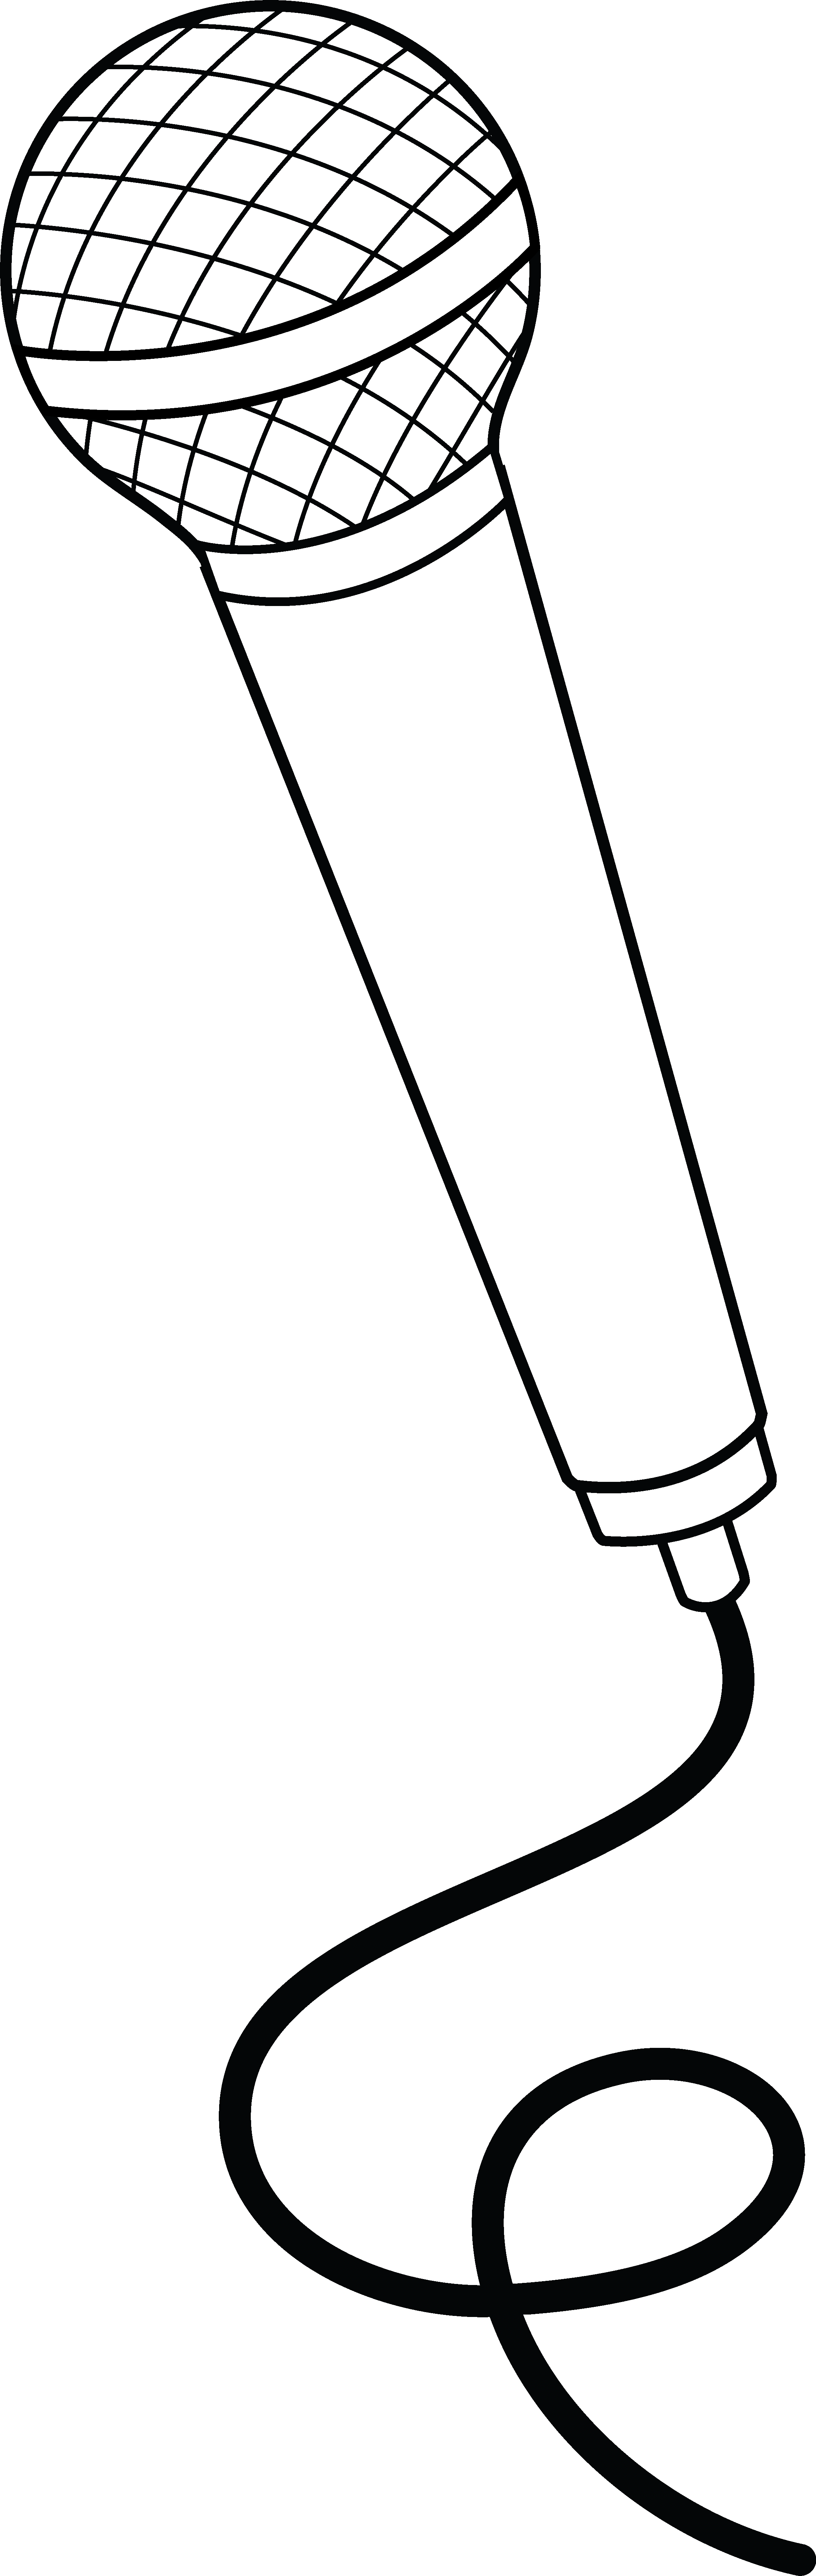 Black and White Microphone | Microphone drawing, Clip art, Free ...